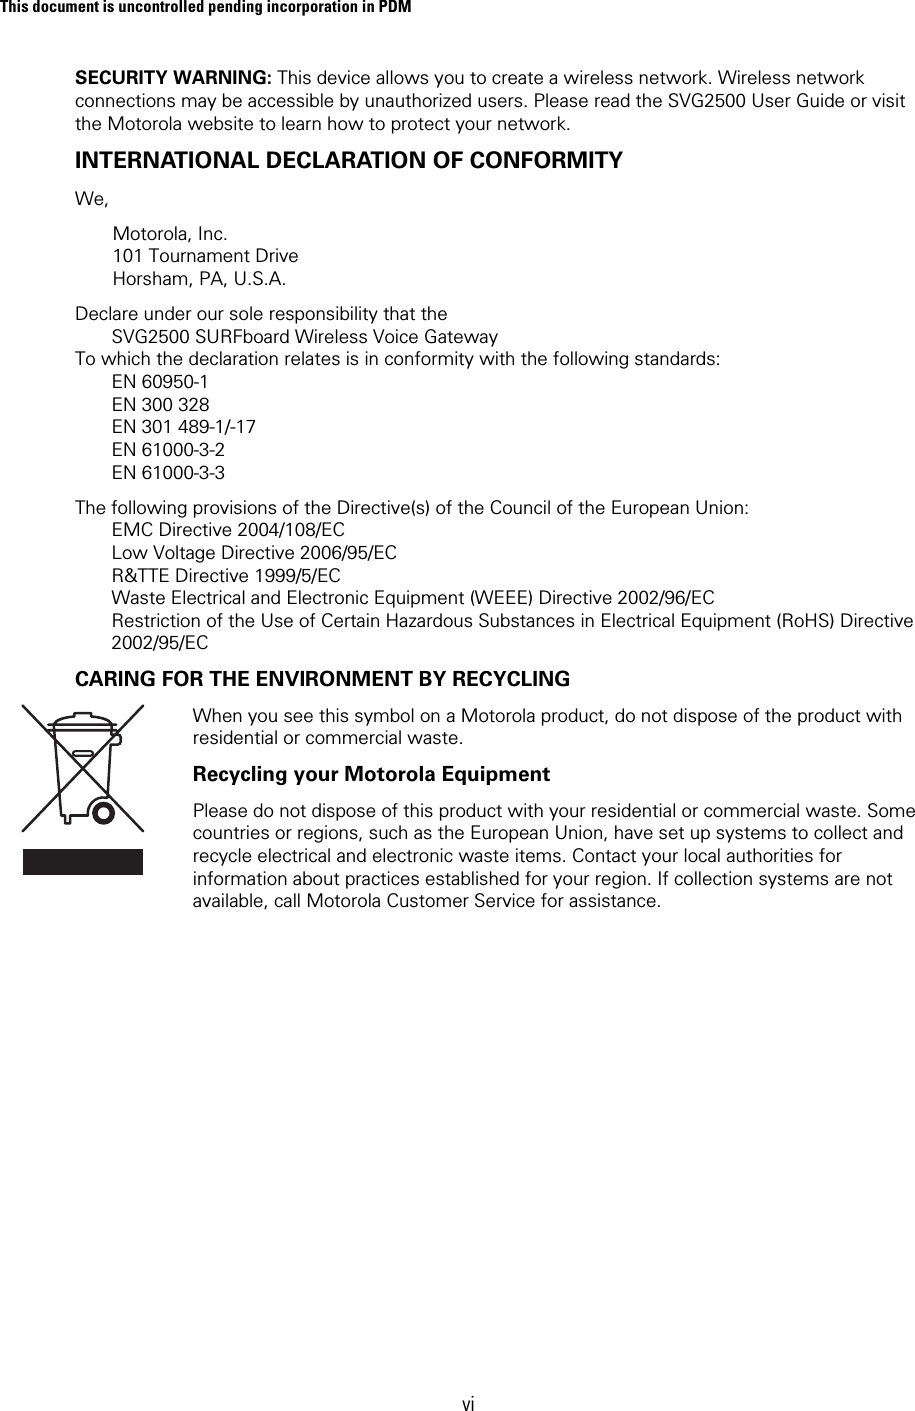 This document is uncontrolled pending incorporation in PDM  vi SECURITY WARNING: This device allows you to create a wireless network. Wireless network connections may be accessible by unauthorized users. Please read the SVG2500 User Guide or visit the Motorola website to learn how to protect your network. INTERNATIONAL DECLARATION OF CONFORMITY  We,  Motorola, Inc.  101 Tournament Drive Horsham, PA, U.S.A.  Declare under our sole responsibility that the         SVG2500 SURFboard Wireless Voice Gateway To which the declaration relates is in conformity with the following standards:        EN 60950-1         EN 300 328        EN 301 489-1/-17        EN 61000-3-2        EN 61000-3-3 The following provisions of the Directive(s) of the Council of the European Union:        EMC Directive 2004/108/EC         Low Voltage Directive 2006/95/EC        R&amp;TTE Directive 1999/5/EC        Waste Electrical and Electronic Equipment (WEEE) Directive 2002/96/EC        Restriction of the Use of Certain Hazardous Substances in Electrical Equipment (RoHS) Directive        2002/95/EC CARING FOR THE ENVIRONMENT BY RECYCLING  When you see this symbol on a Motorola product, do not dispose of the product with residential or commercial waste. Recycling your Motorola Equipment Please do not dispose of this product with your residential or commercial waste. Some countries or regions, such as the European Union, have set up systems to collect and recycle electrical and electronic waste items. Contact your local authorities for information about practices established for your region. If collection systems are not available, call Motorola Customer Service for assistance.  